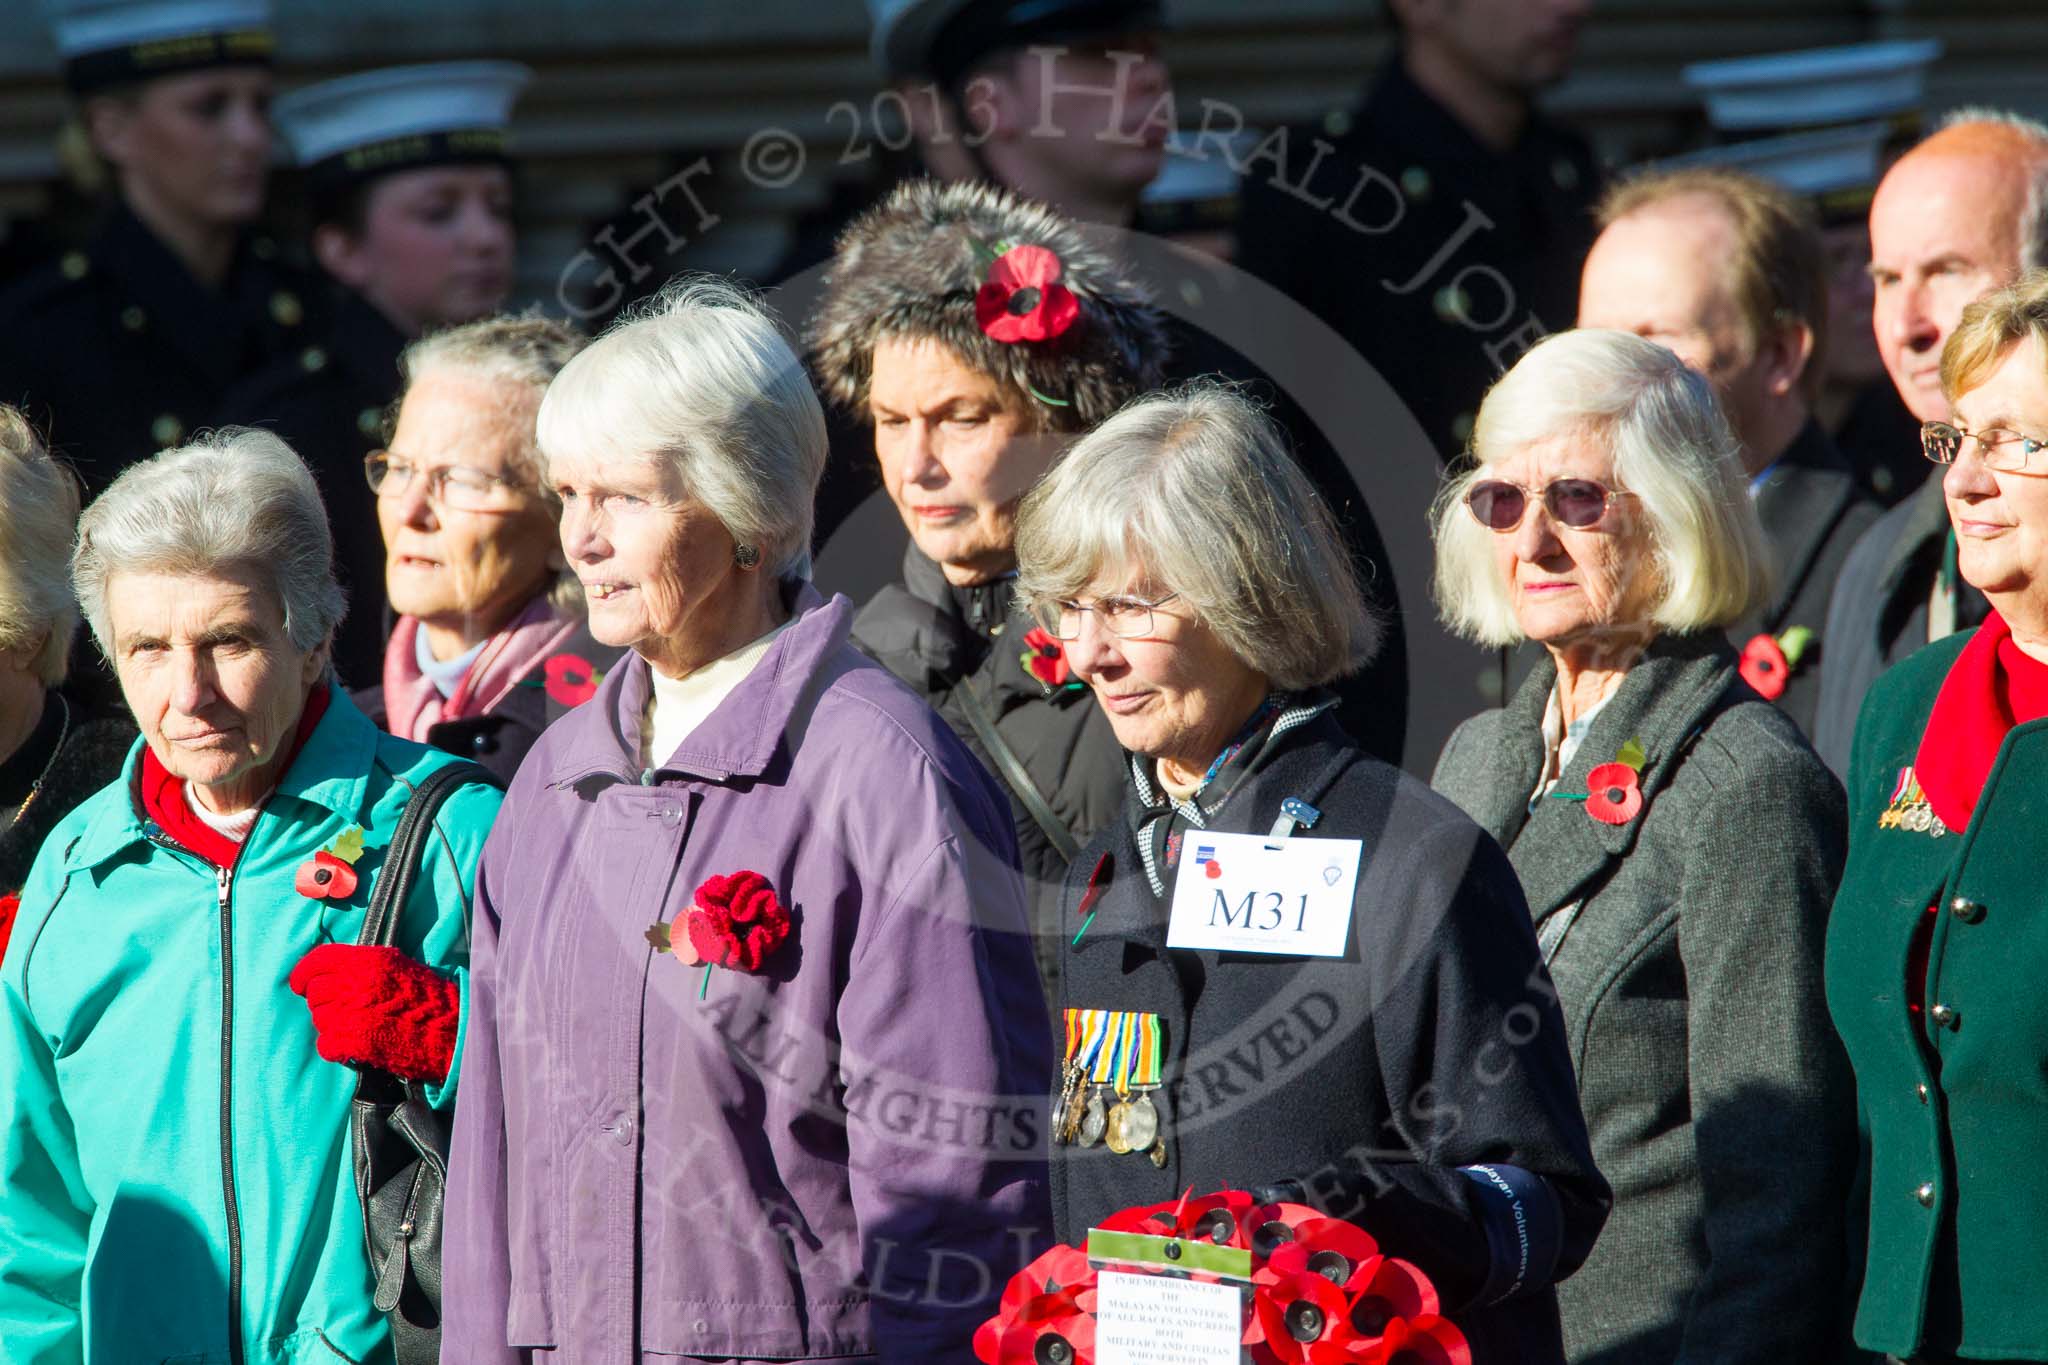 Remembrance Sunday at the Cenotaph in London 2014: Group M31 - Malayan Volunteers Group.
Press stand opposite the Foreign Office building, Whitehall, London SW1,
London,
Greater London,
United Kingdom,
on 09 November 2014 at 12:19, image #2229